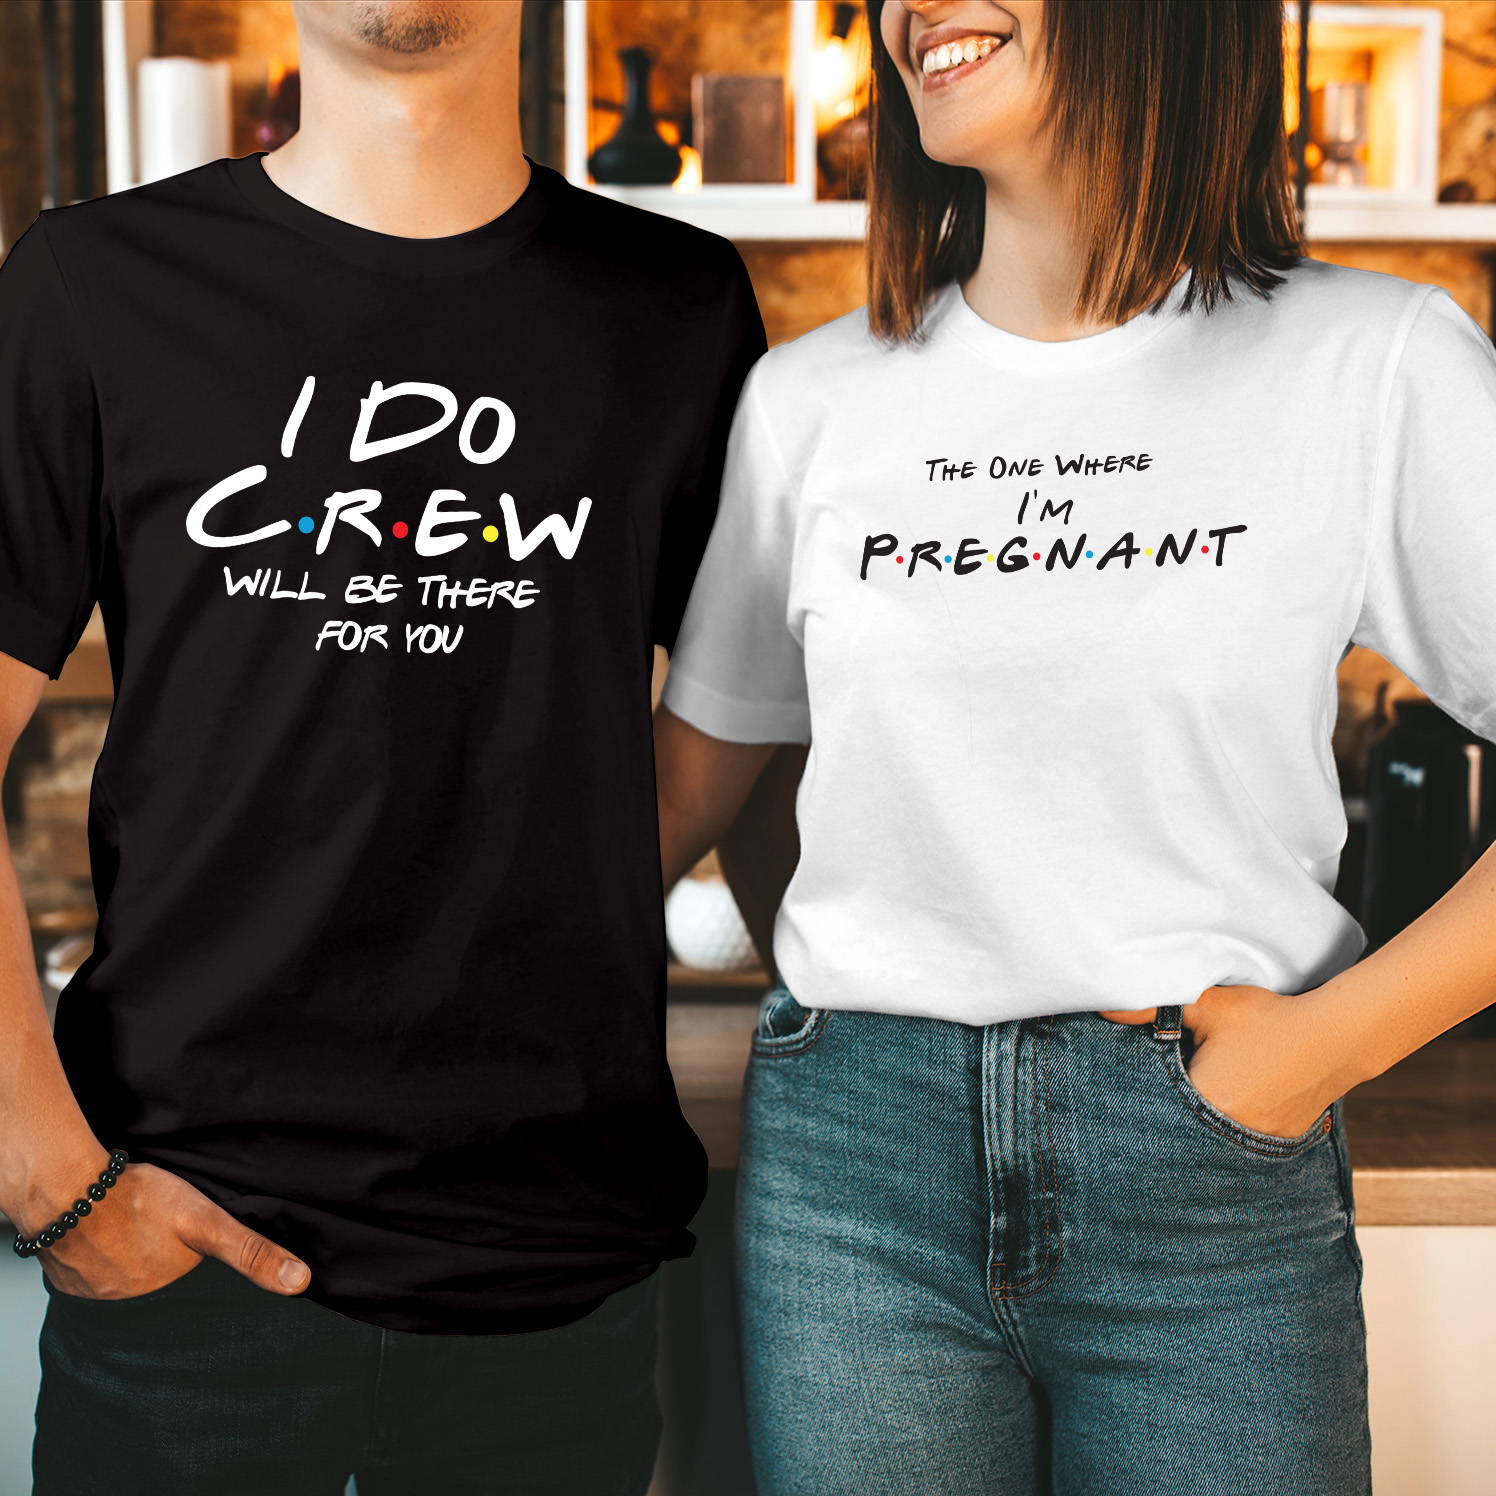 The One Where I'm Pregnant Baby Reveal Birthday T-Shirt, Friends Pregnancy Annoucement Shirt Pregnancy Reveal T-Shirt Couples Shirts